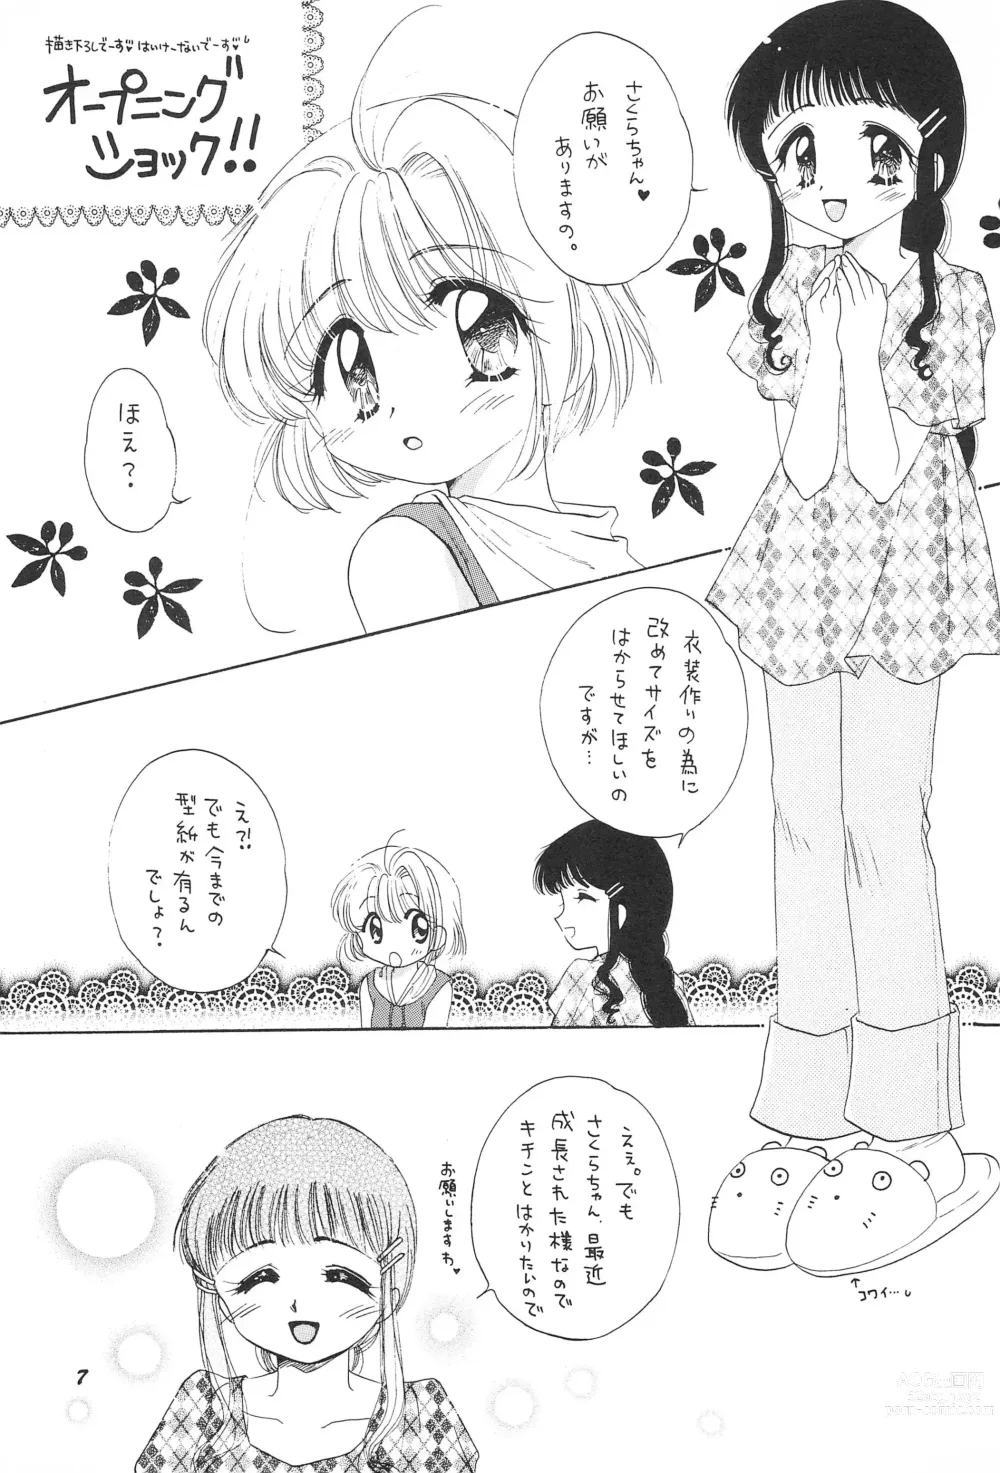 Page 9 of doujinshi LOVELY CHERRY